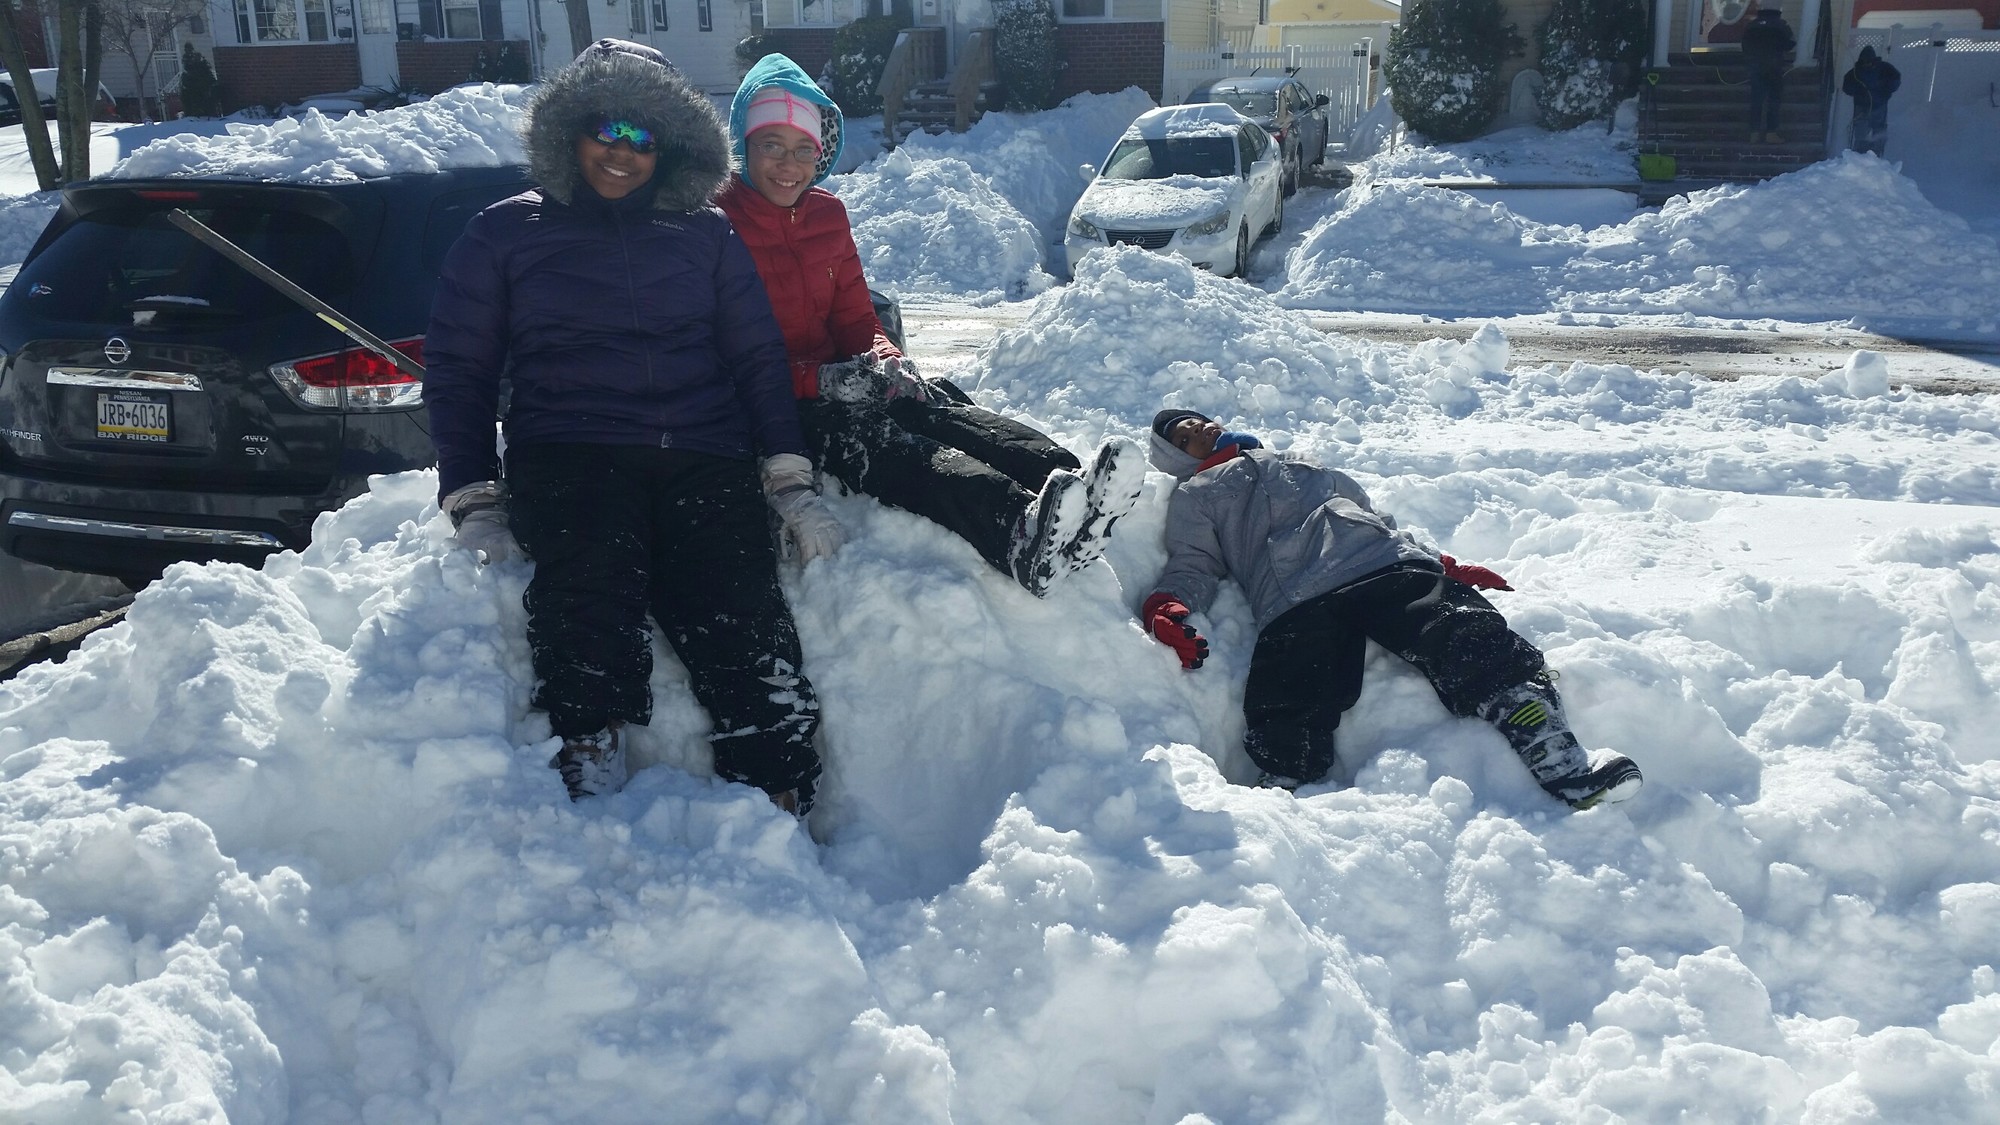 The mounds of snow created by digging out on Sunday made for some good climbing, as Amiya, 12, Rasheedah, 13, and Jaylen, 6, found out.